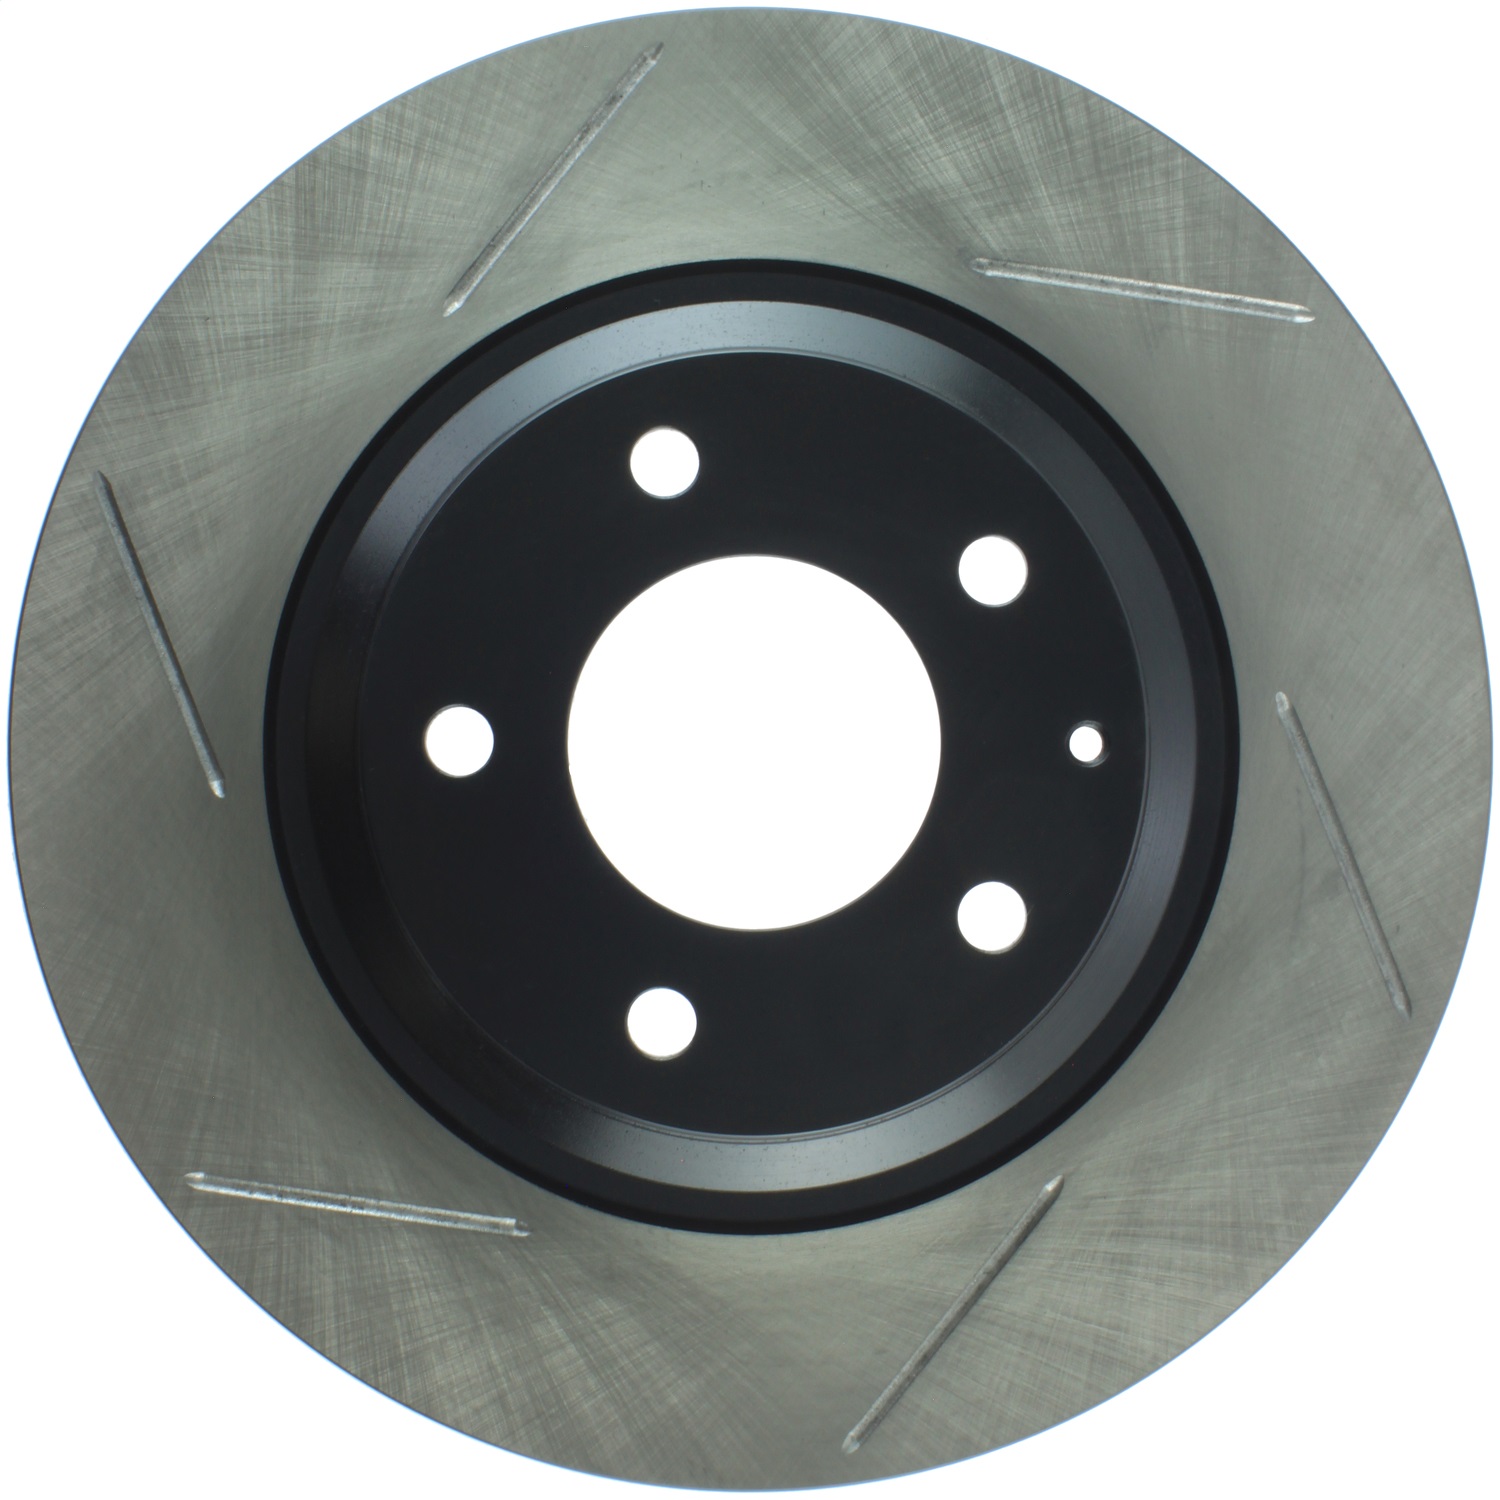 StopTech 126.45072SR Sport Slotted Disc Brake Rotor Fits 04-11 RX-8